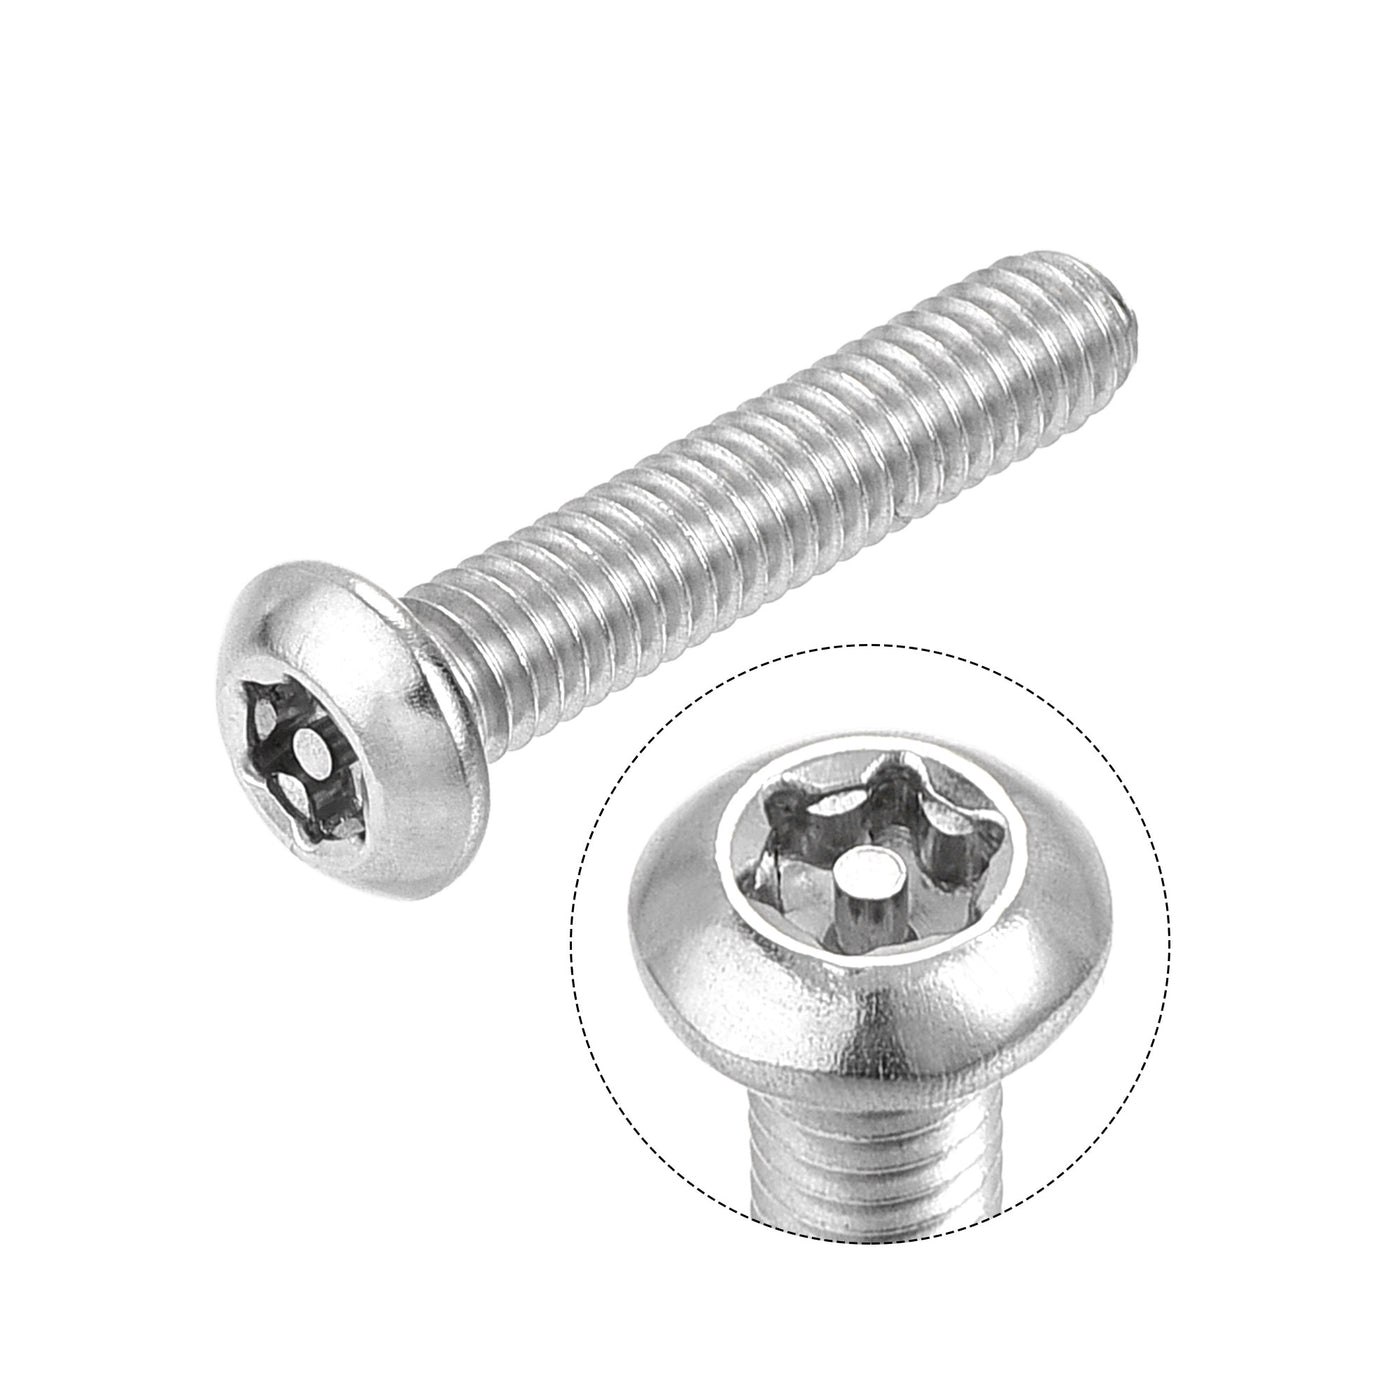 uxcell Uxcell M4x20mm Torx Security Machine Screw, 20pcs Pan Head Screws Inside Column, 304 Stainless Steel Fasteners Bolts